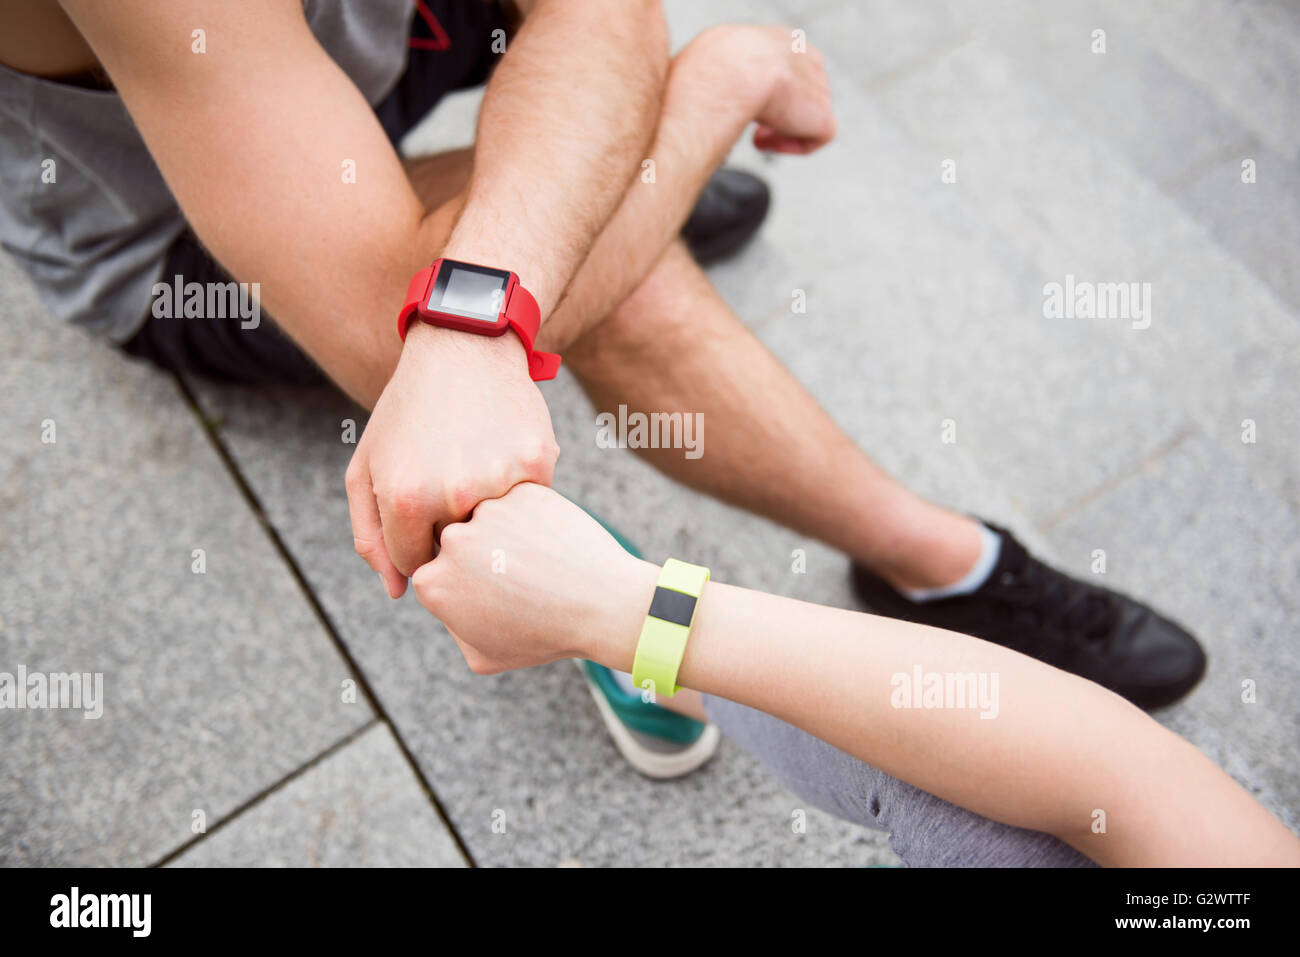 Woman and man fist bumping Stock Photo